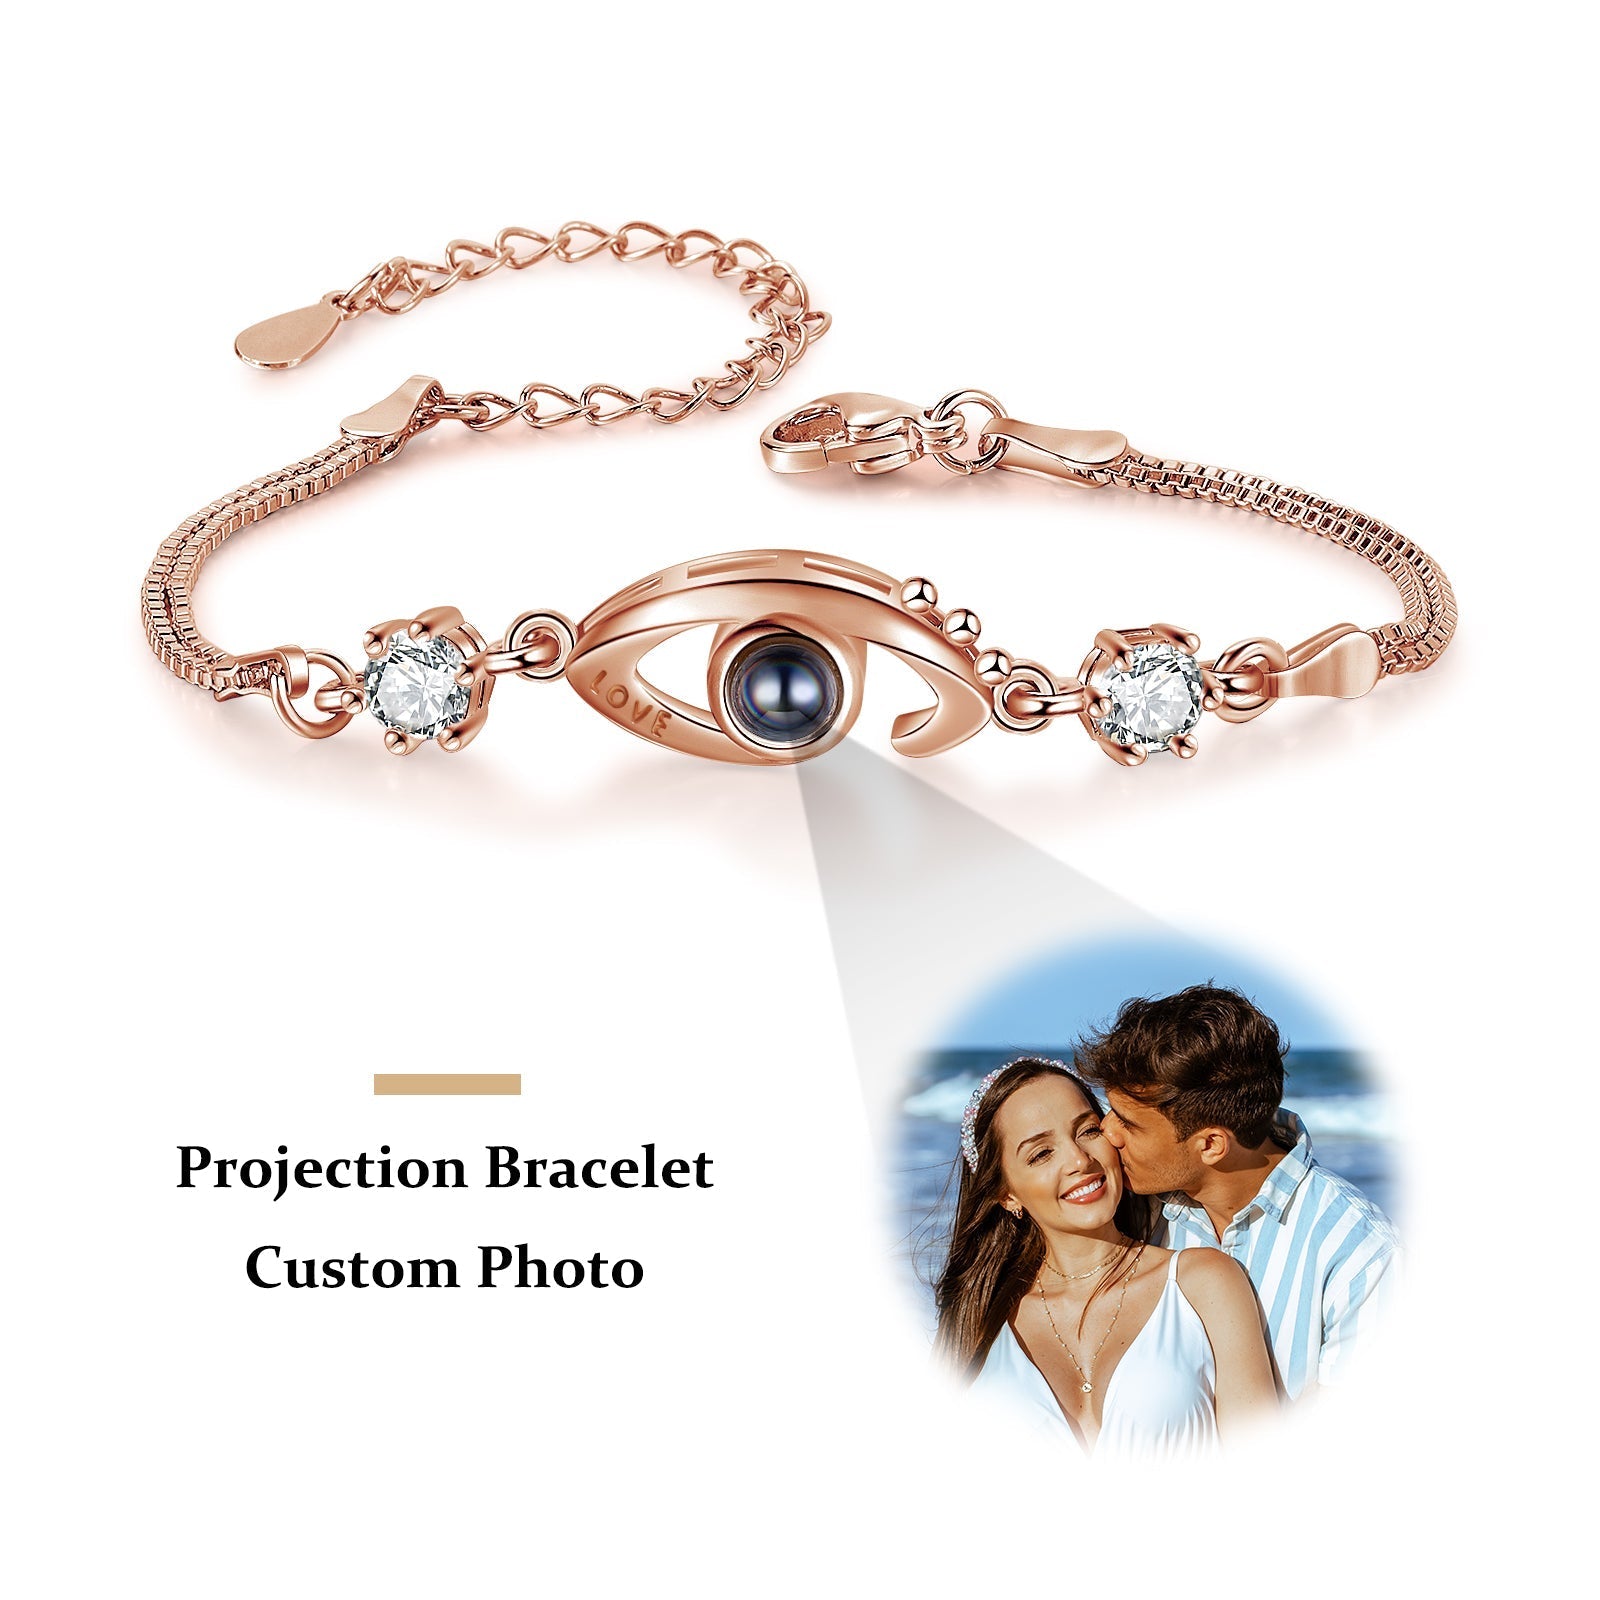 ThinkEngraved Projection necklace Color Photo / 14k Rose Gold over Surgical Steel Custom Seeing Eye Photo Projection Bracelet - Color or Black and White